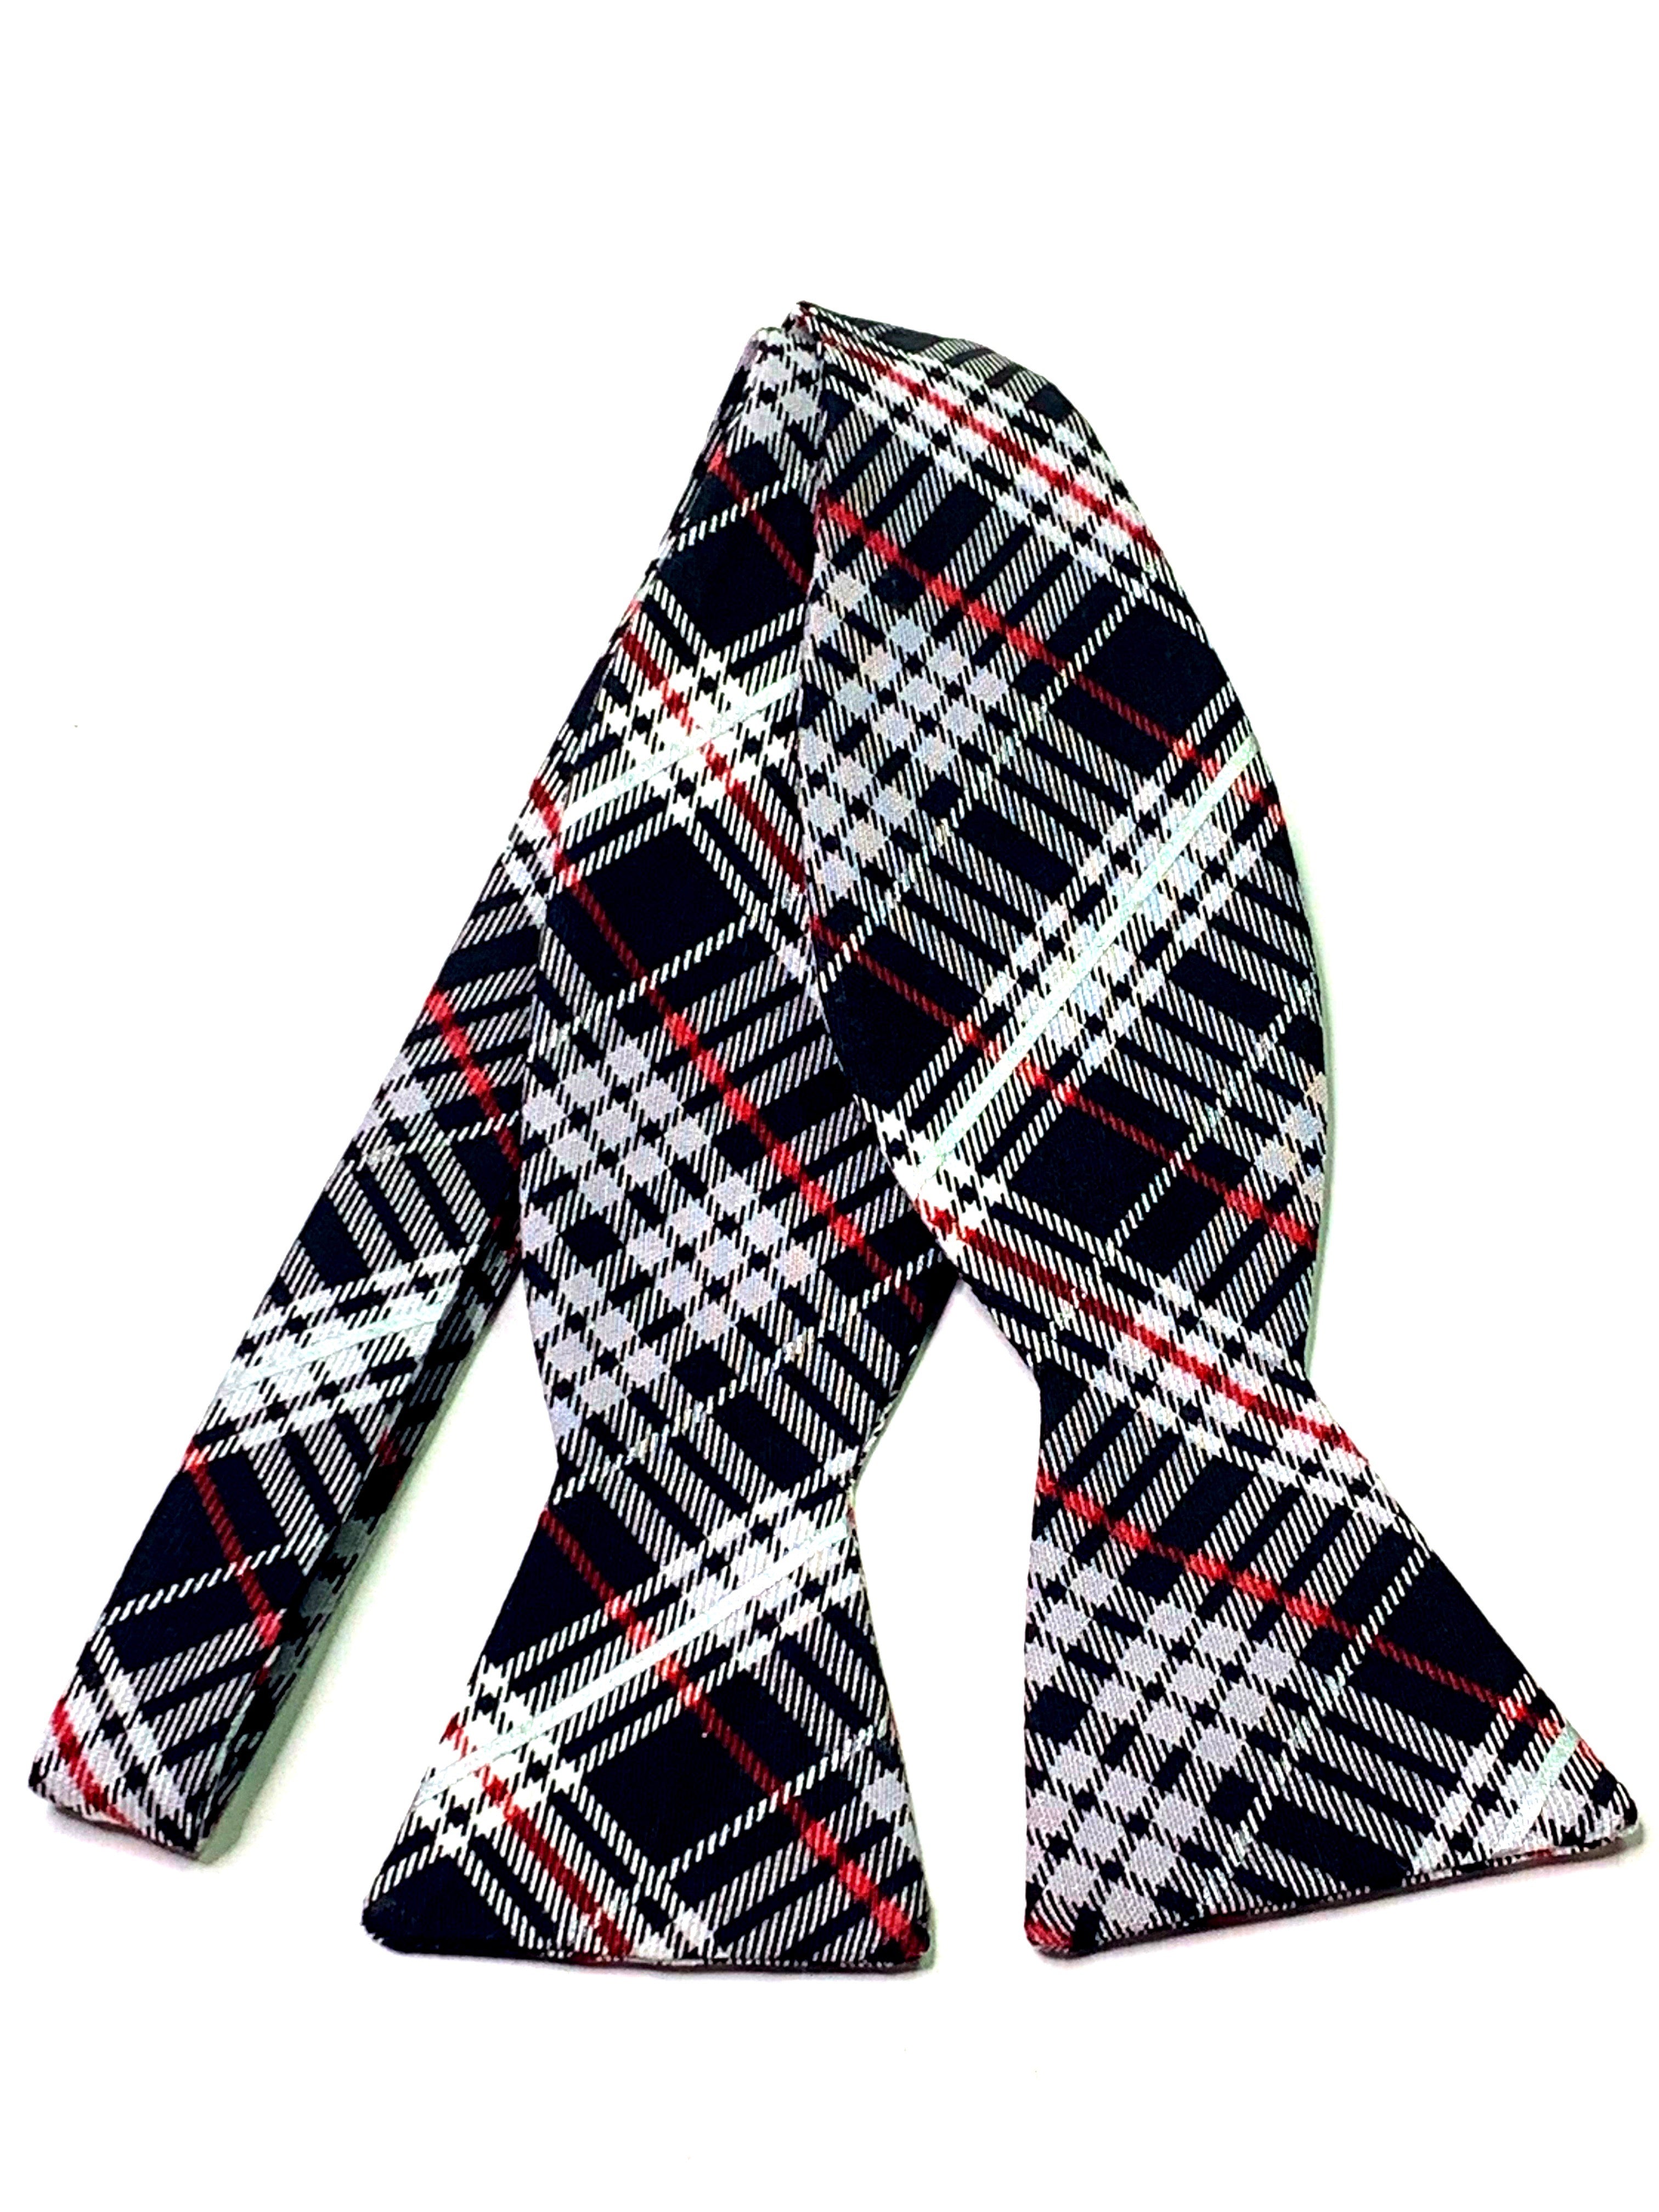 Self Tie Red Black & White Plaid Bow Tie - Jewellery Unique Gifts & Accessories